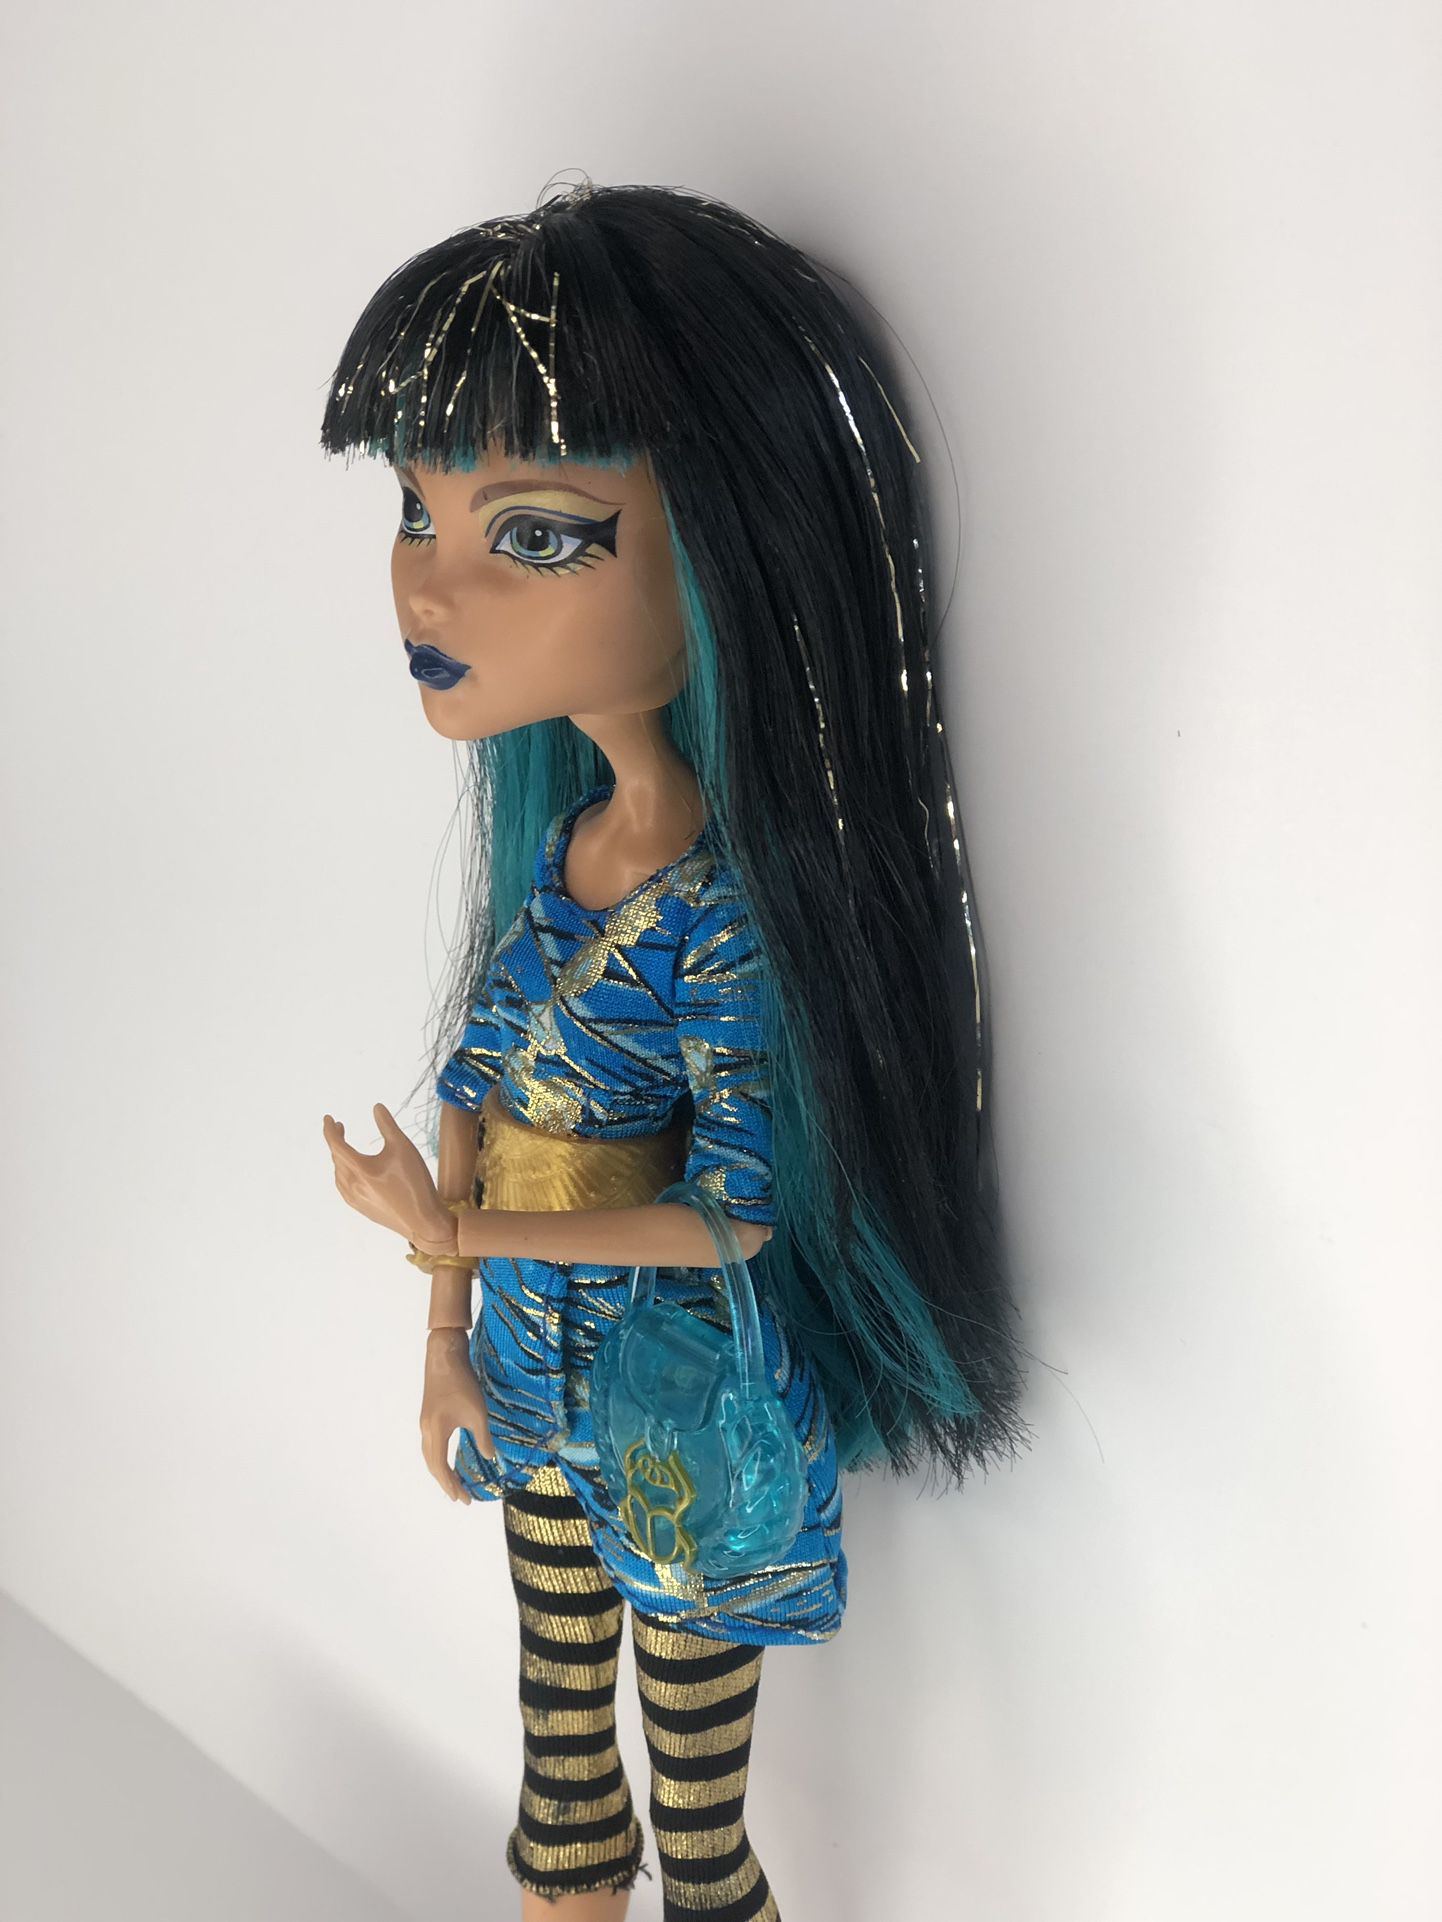 Monster High Picture Day Cleo De Nile Doll  Monster high pictures, Monster  high dolls, Picture day